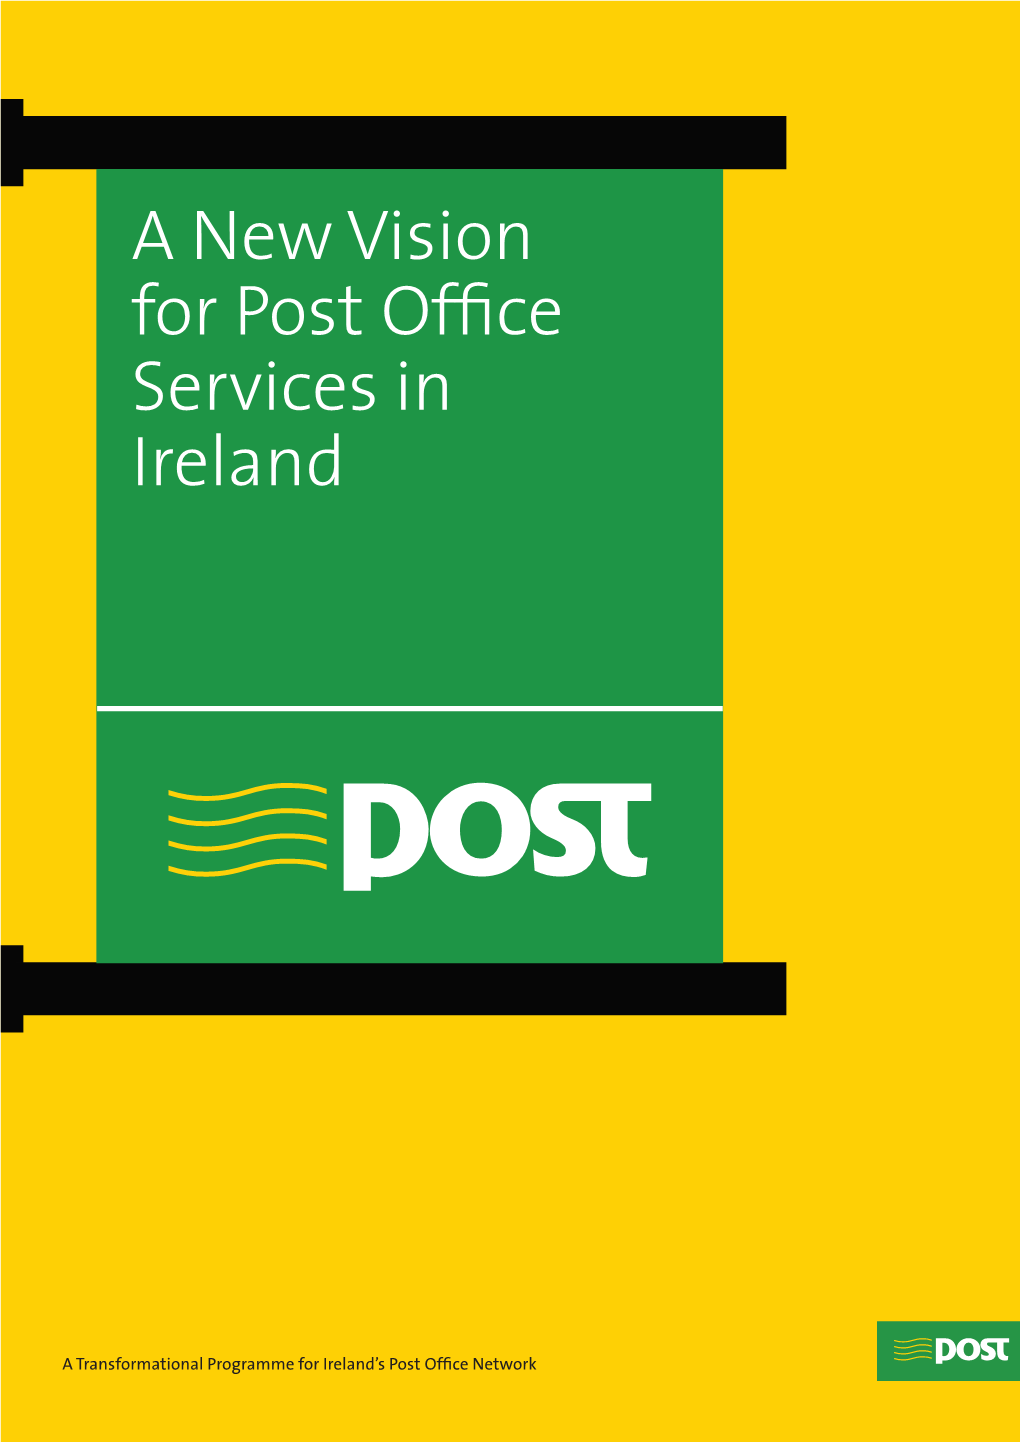 A New Vision for Post Office Services in Ireland